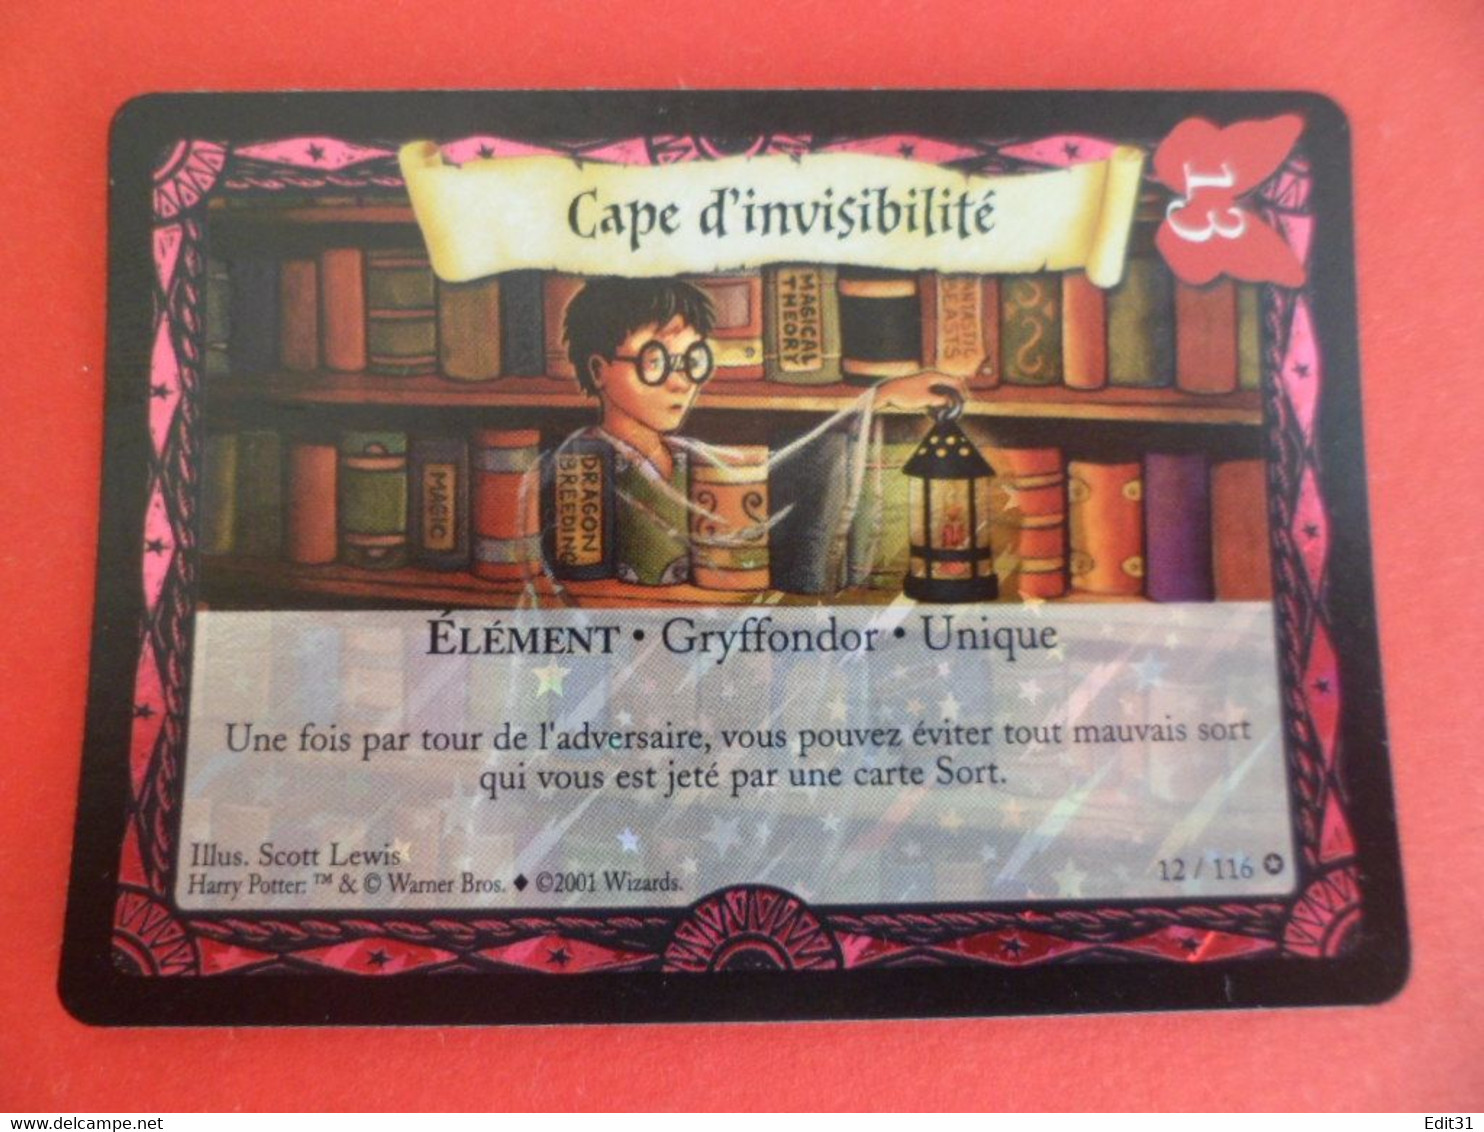 Harry Potter Trading Card Game 12/116 - 2001  - Ill. Scott Lewis - Cape D'invisibilité Hologramme Wizards - Harry Potter